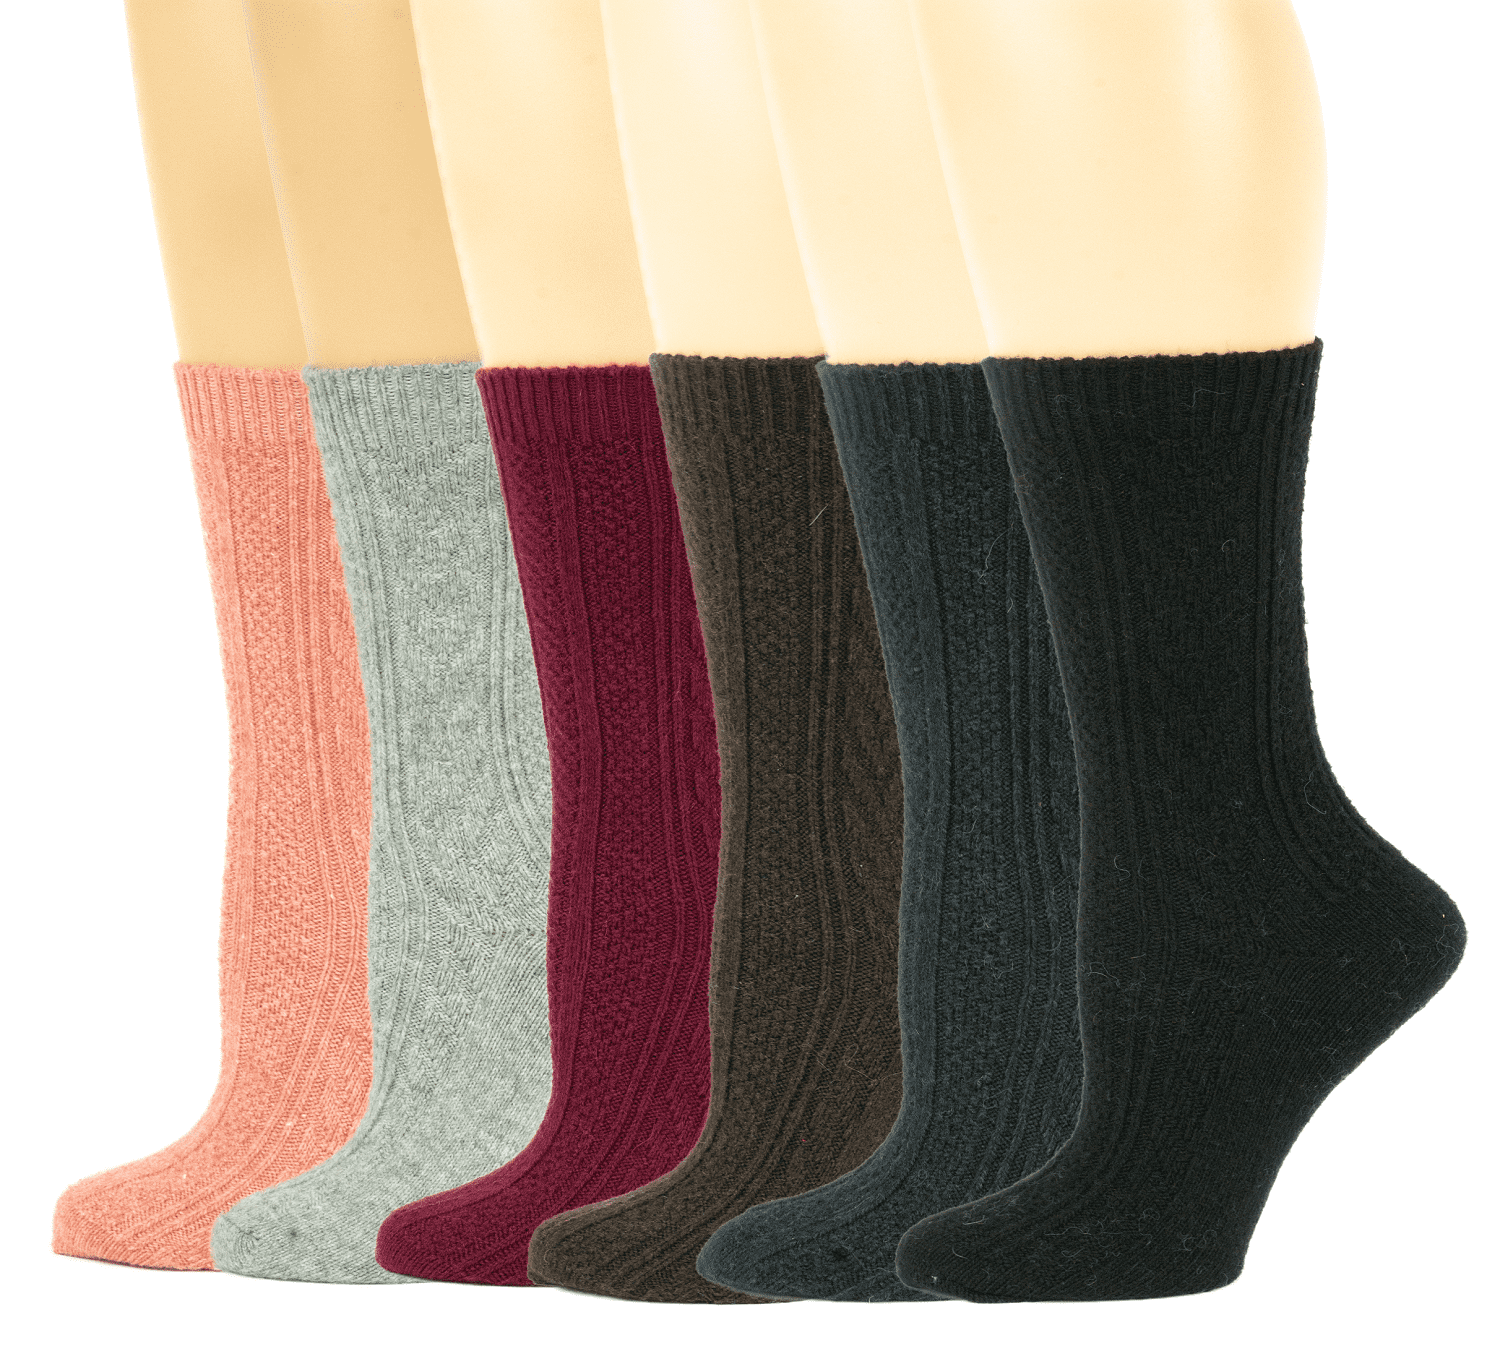 Ladies 5 Pack Fashion Ribbed Knit Winter Boot Crew Socks Size 5-10 W82 mixed 